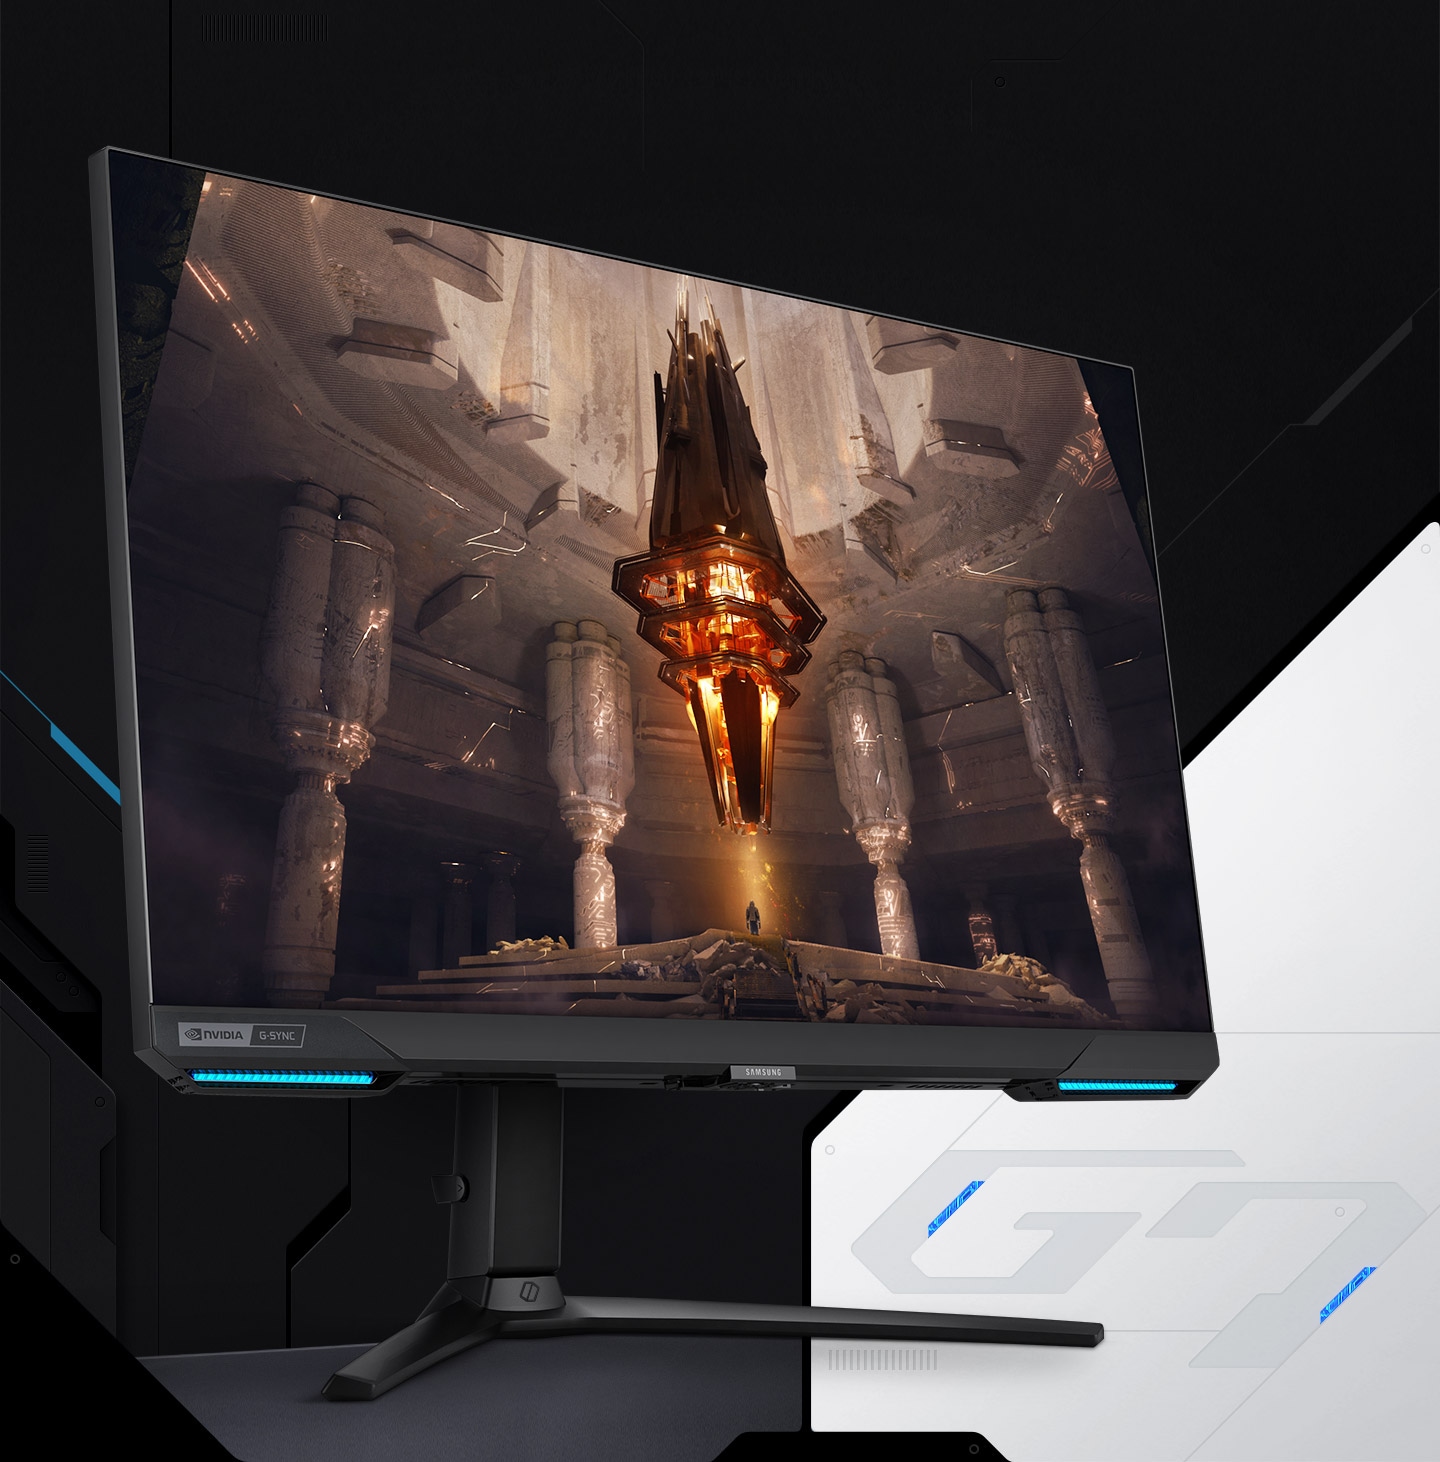 On the monitor display is a orange rocket ship with light emitting from its engine exhausts inside an underground cave. The rocket ship is set to launch out of the opening above, and surrounded by stone pillars and steps. ""G7"" logo is placed on the right side of the monitor stand.